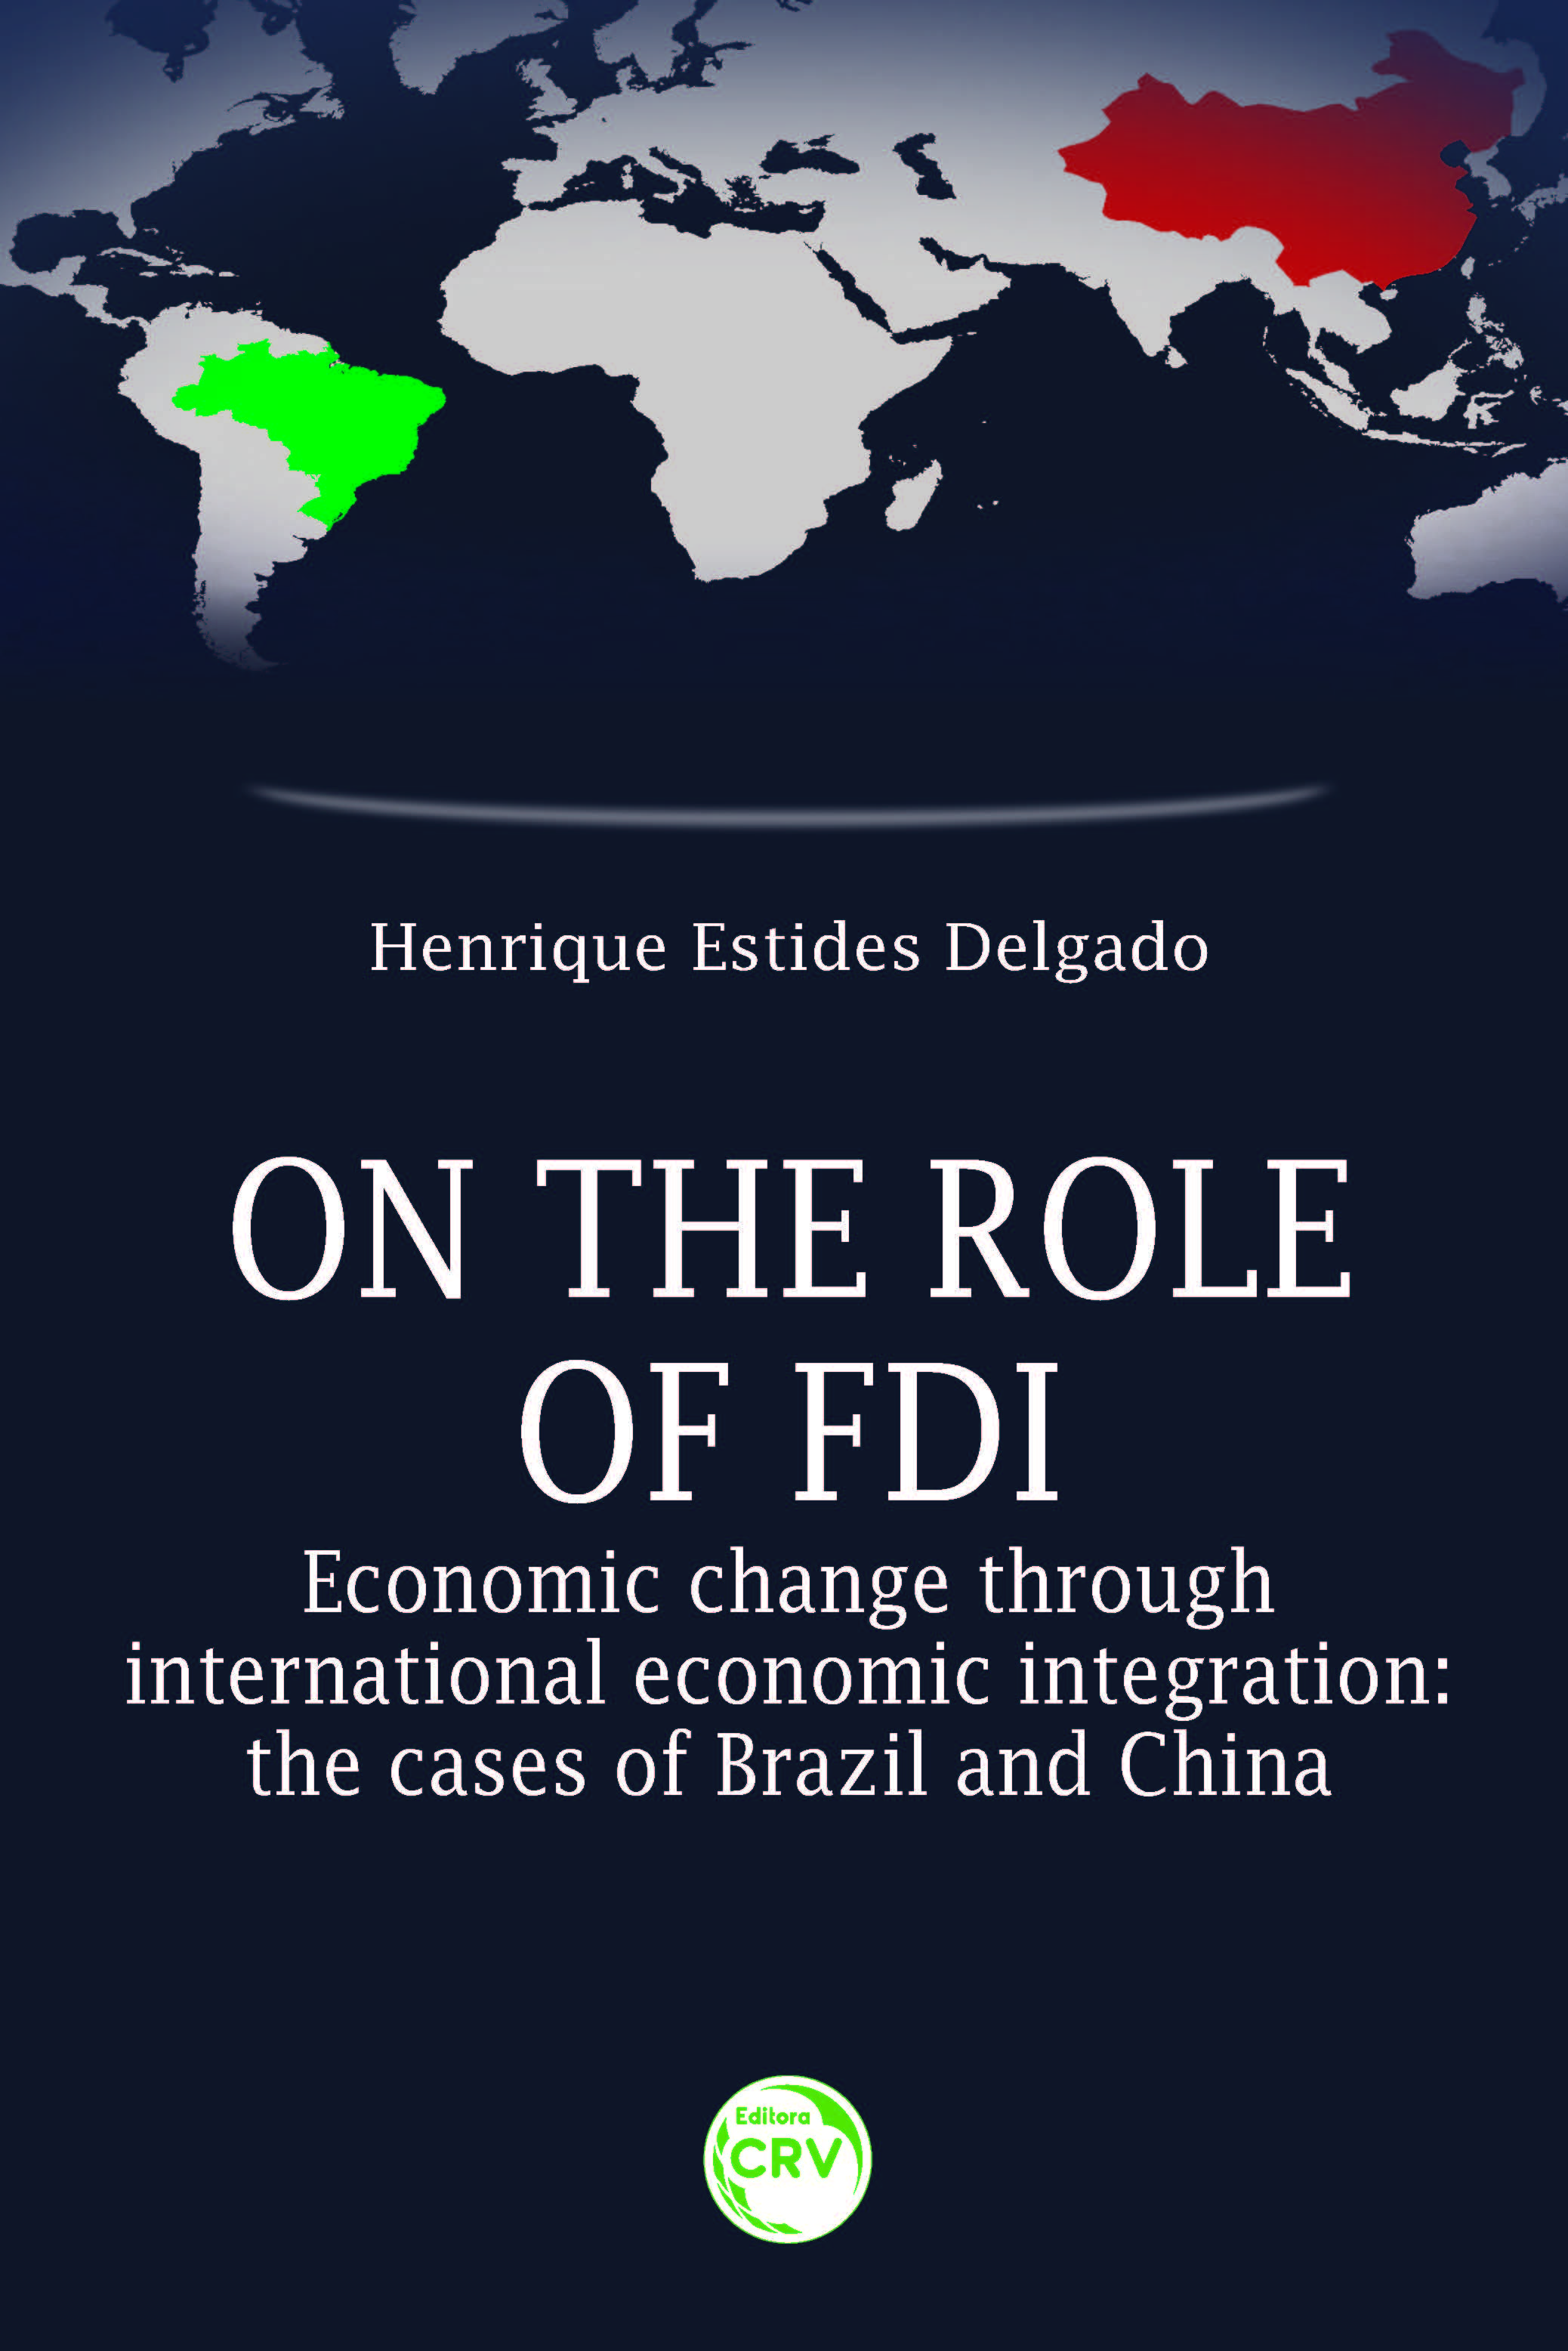 Capa do livro: ON THE ROLE OF FDI – ECONOMIC CHANGE THROUGH INTERNATIONAL ECONOMIC INTEGRATION:<br>the cases of Brazil and China